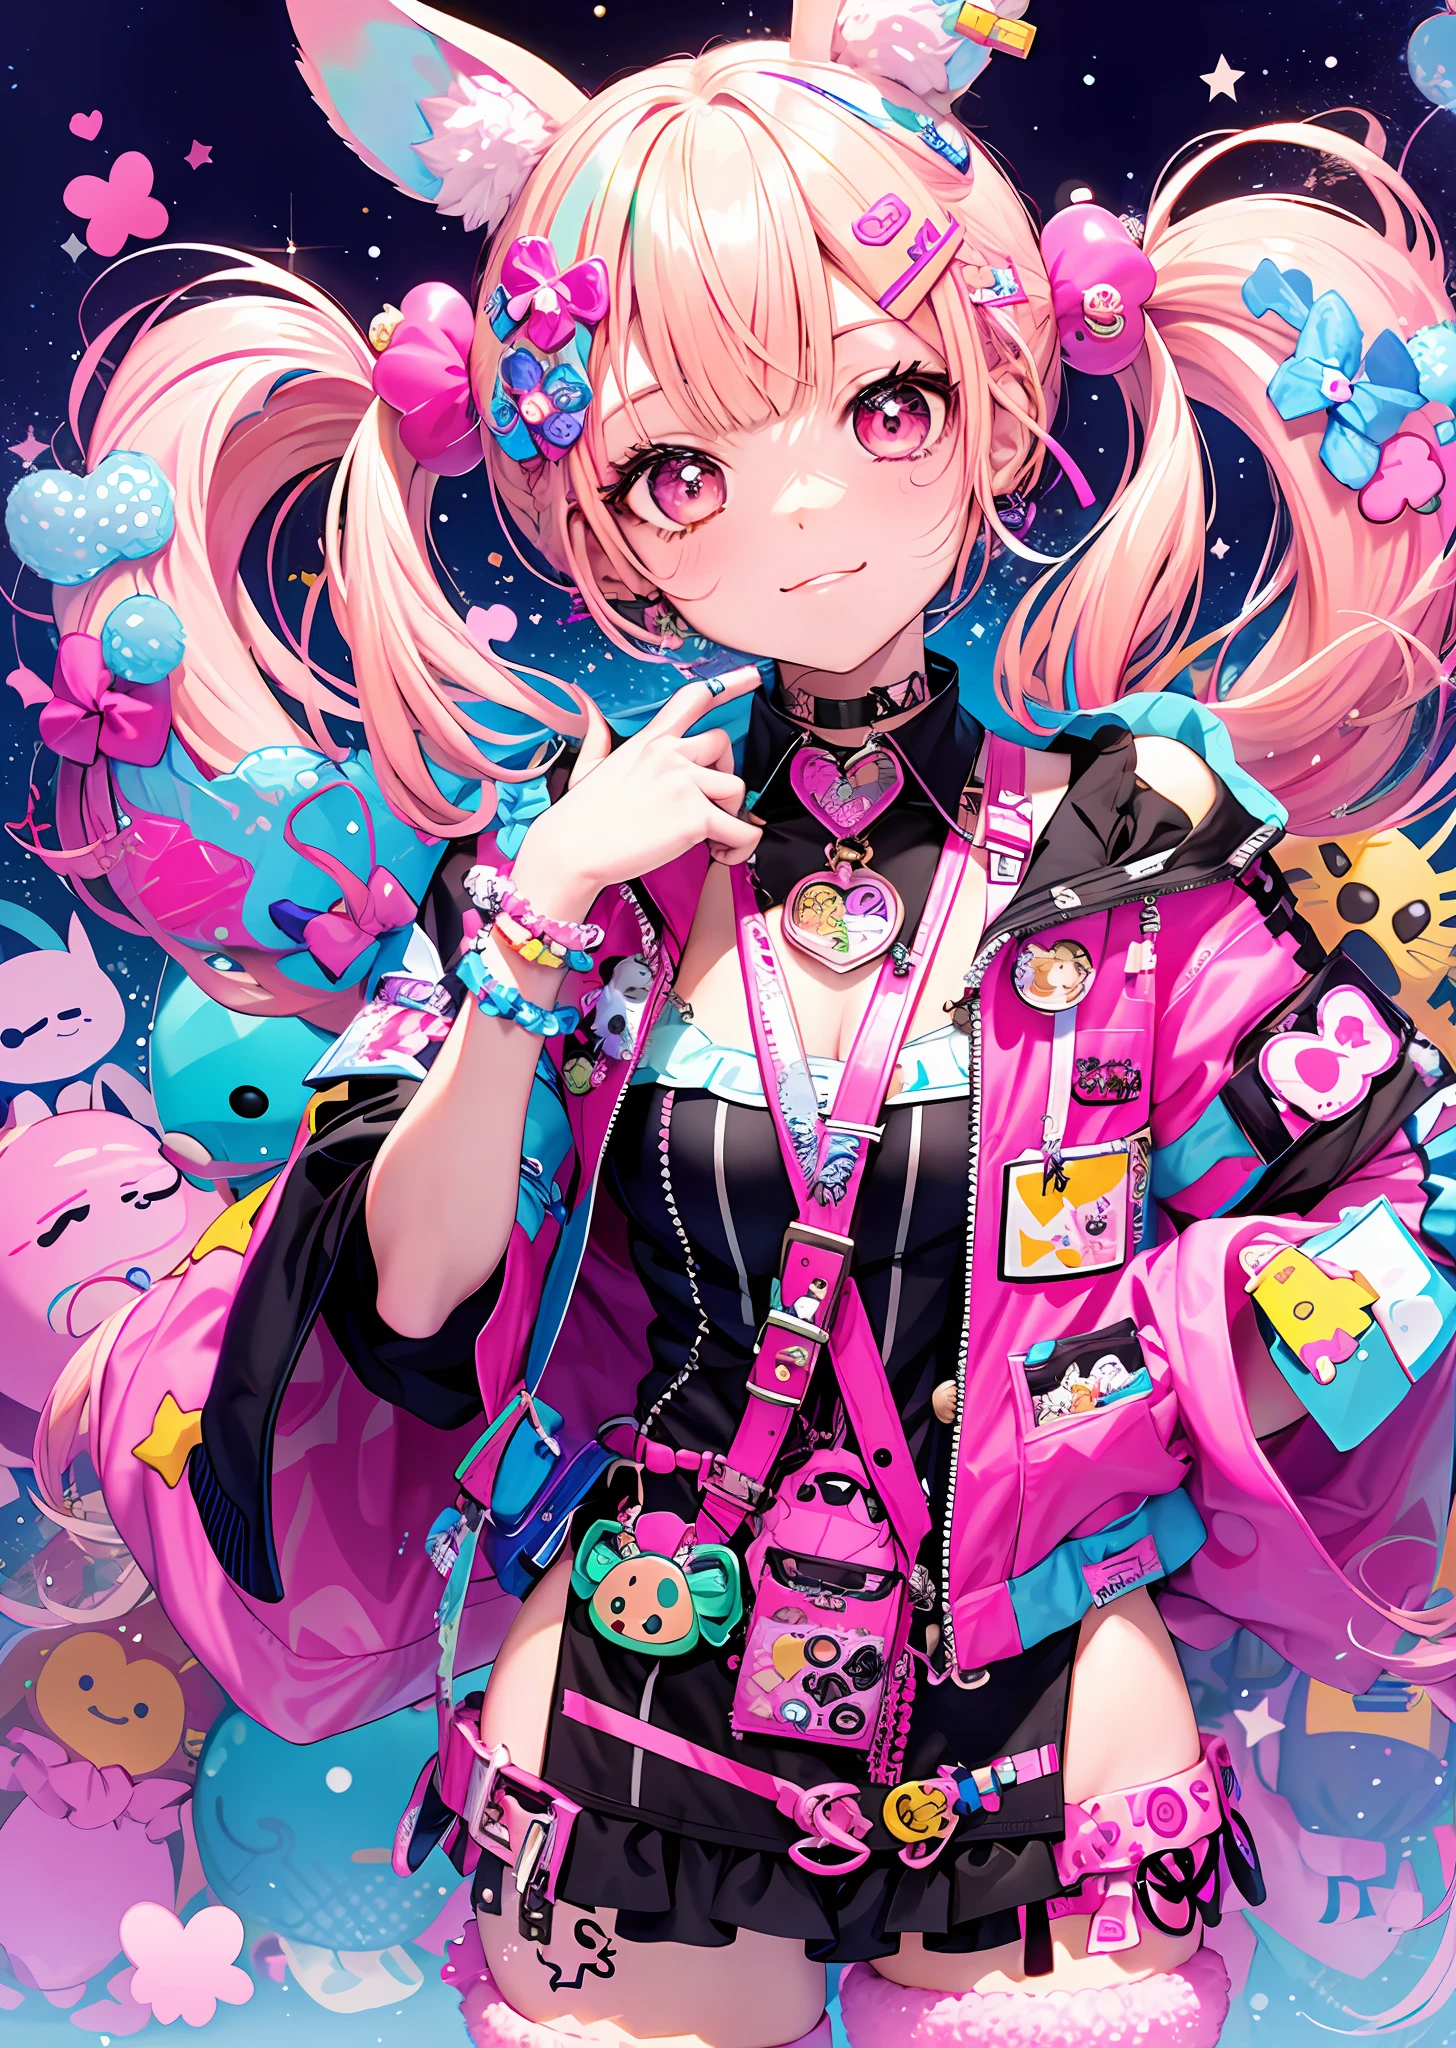 "A single girl with a decora street fashion-inspired look, rocking a crazy harajuku style. She wears legwarmers and big platform shoes, and has her hair styled in adorable pigtails. The scene is set at nighttime, hairpins, accesories, bunny ears with pattern inside, striped "